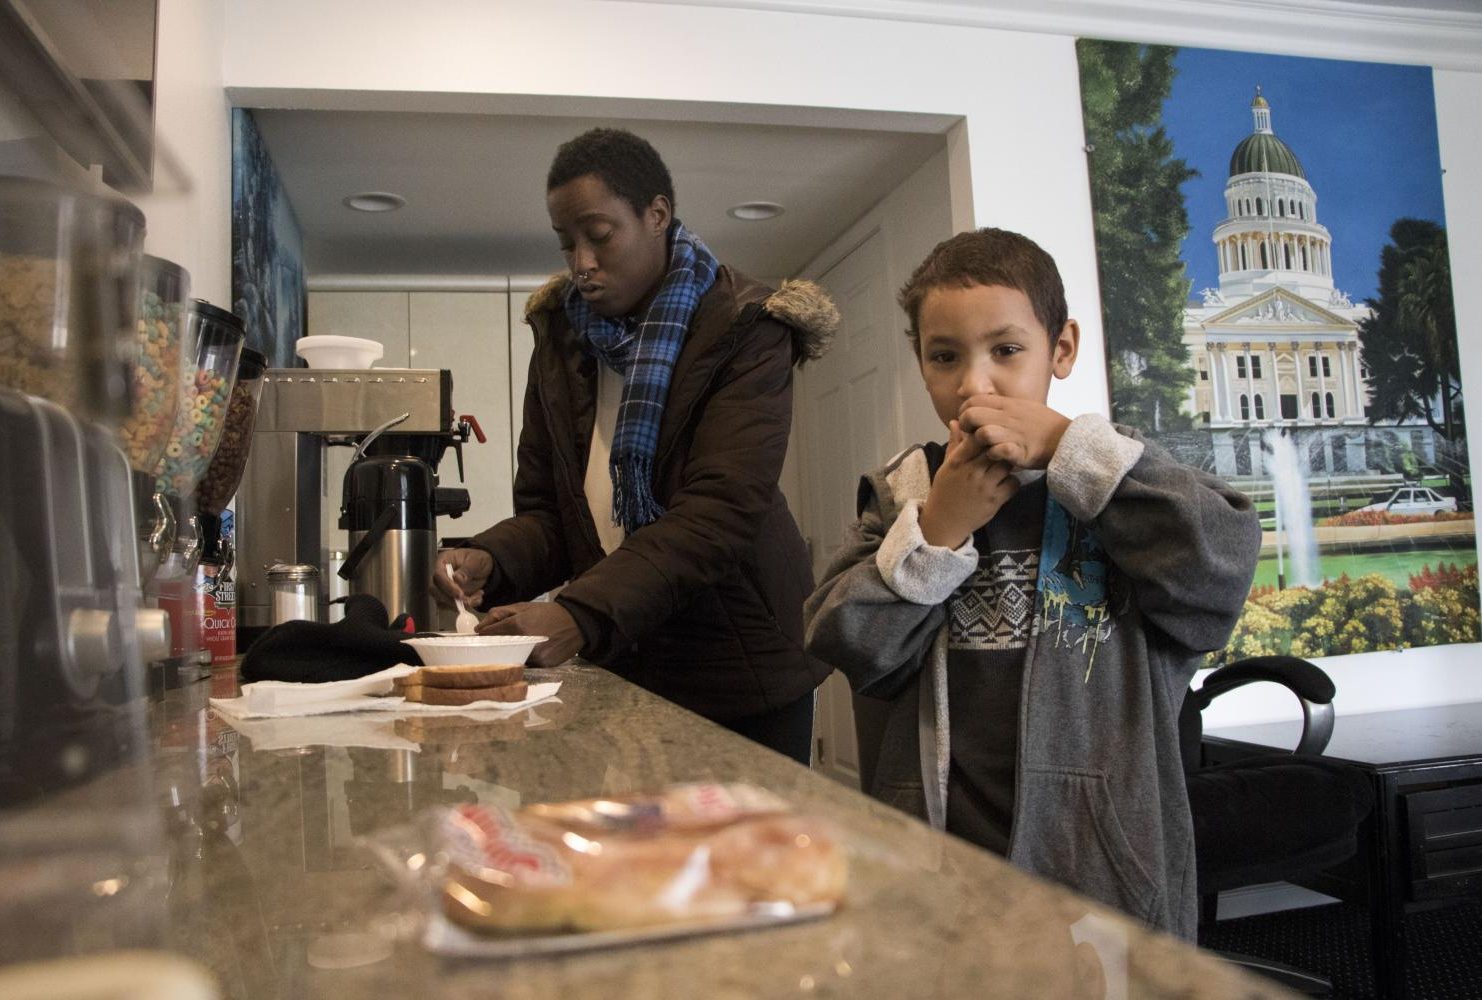 Duren-Hill and Gavin head down to have breakfast provided by their motel Americas Best Value Inn in Sacramento, Calif. on Jan. 3, 2019. (Photo by Ashley Hayes-Stone)